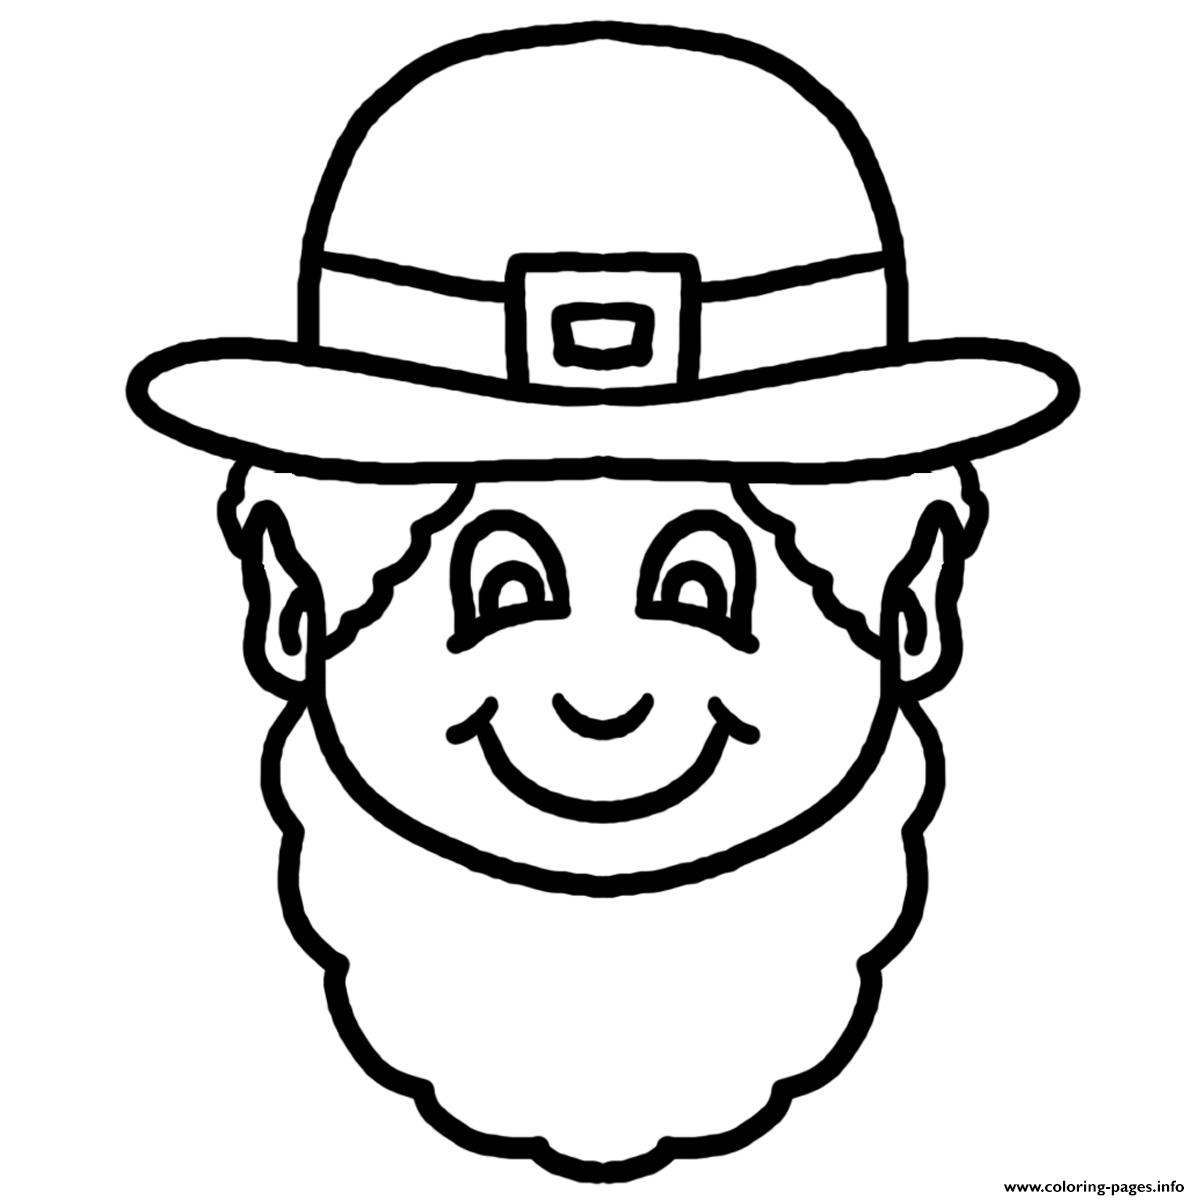 This Black And White Cartoon Leprechaun Face Clipart Illustration coloring